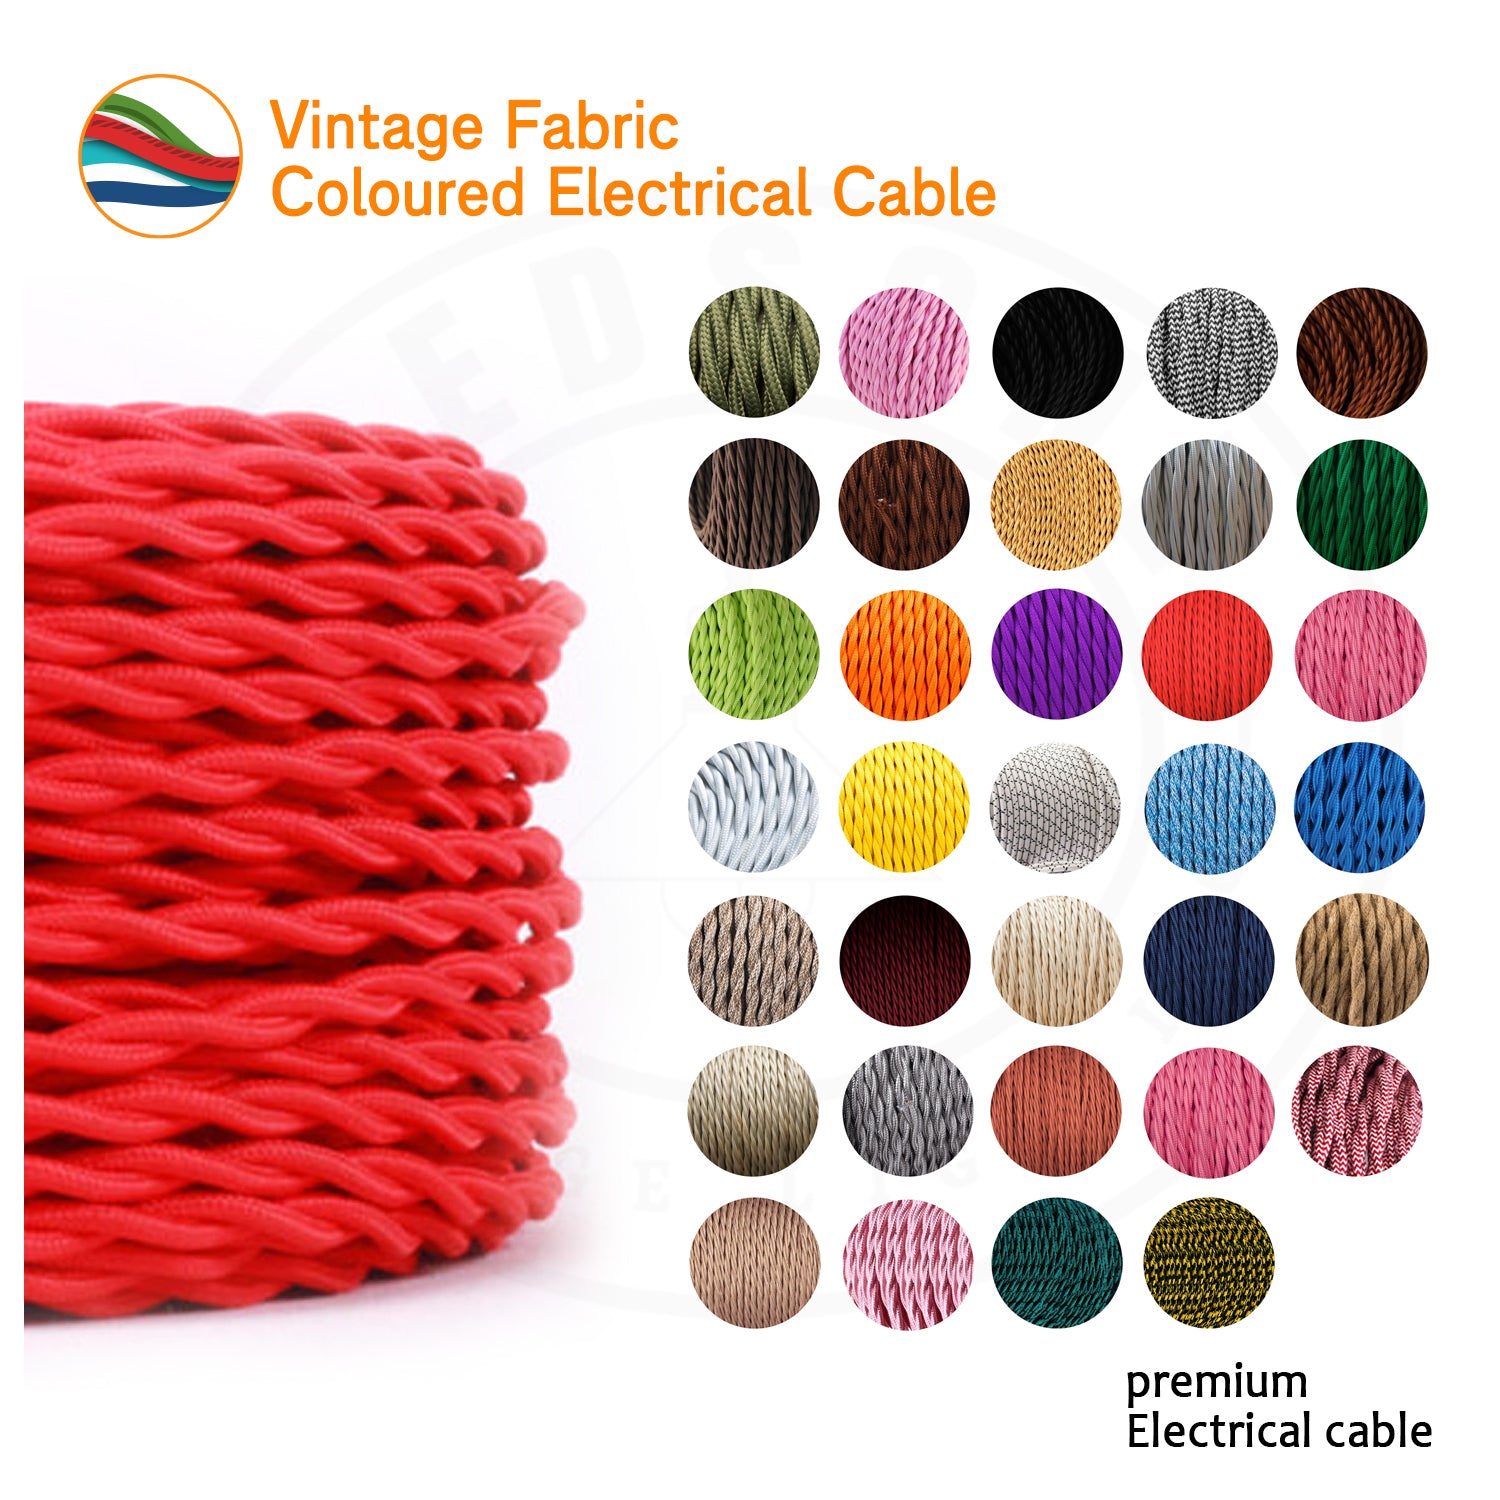 3 Core Twisted Red Vintage Electric Fabric Cable Flex 0.75mm~3195